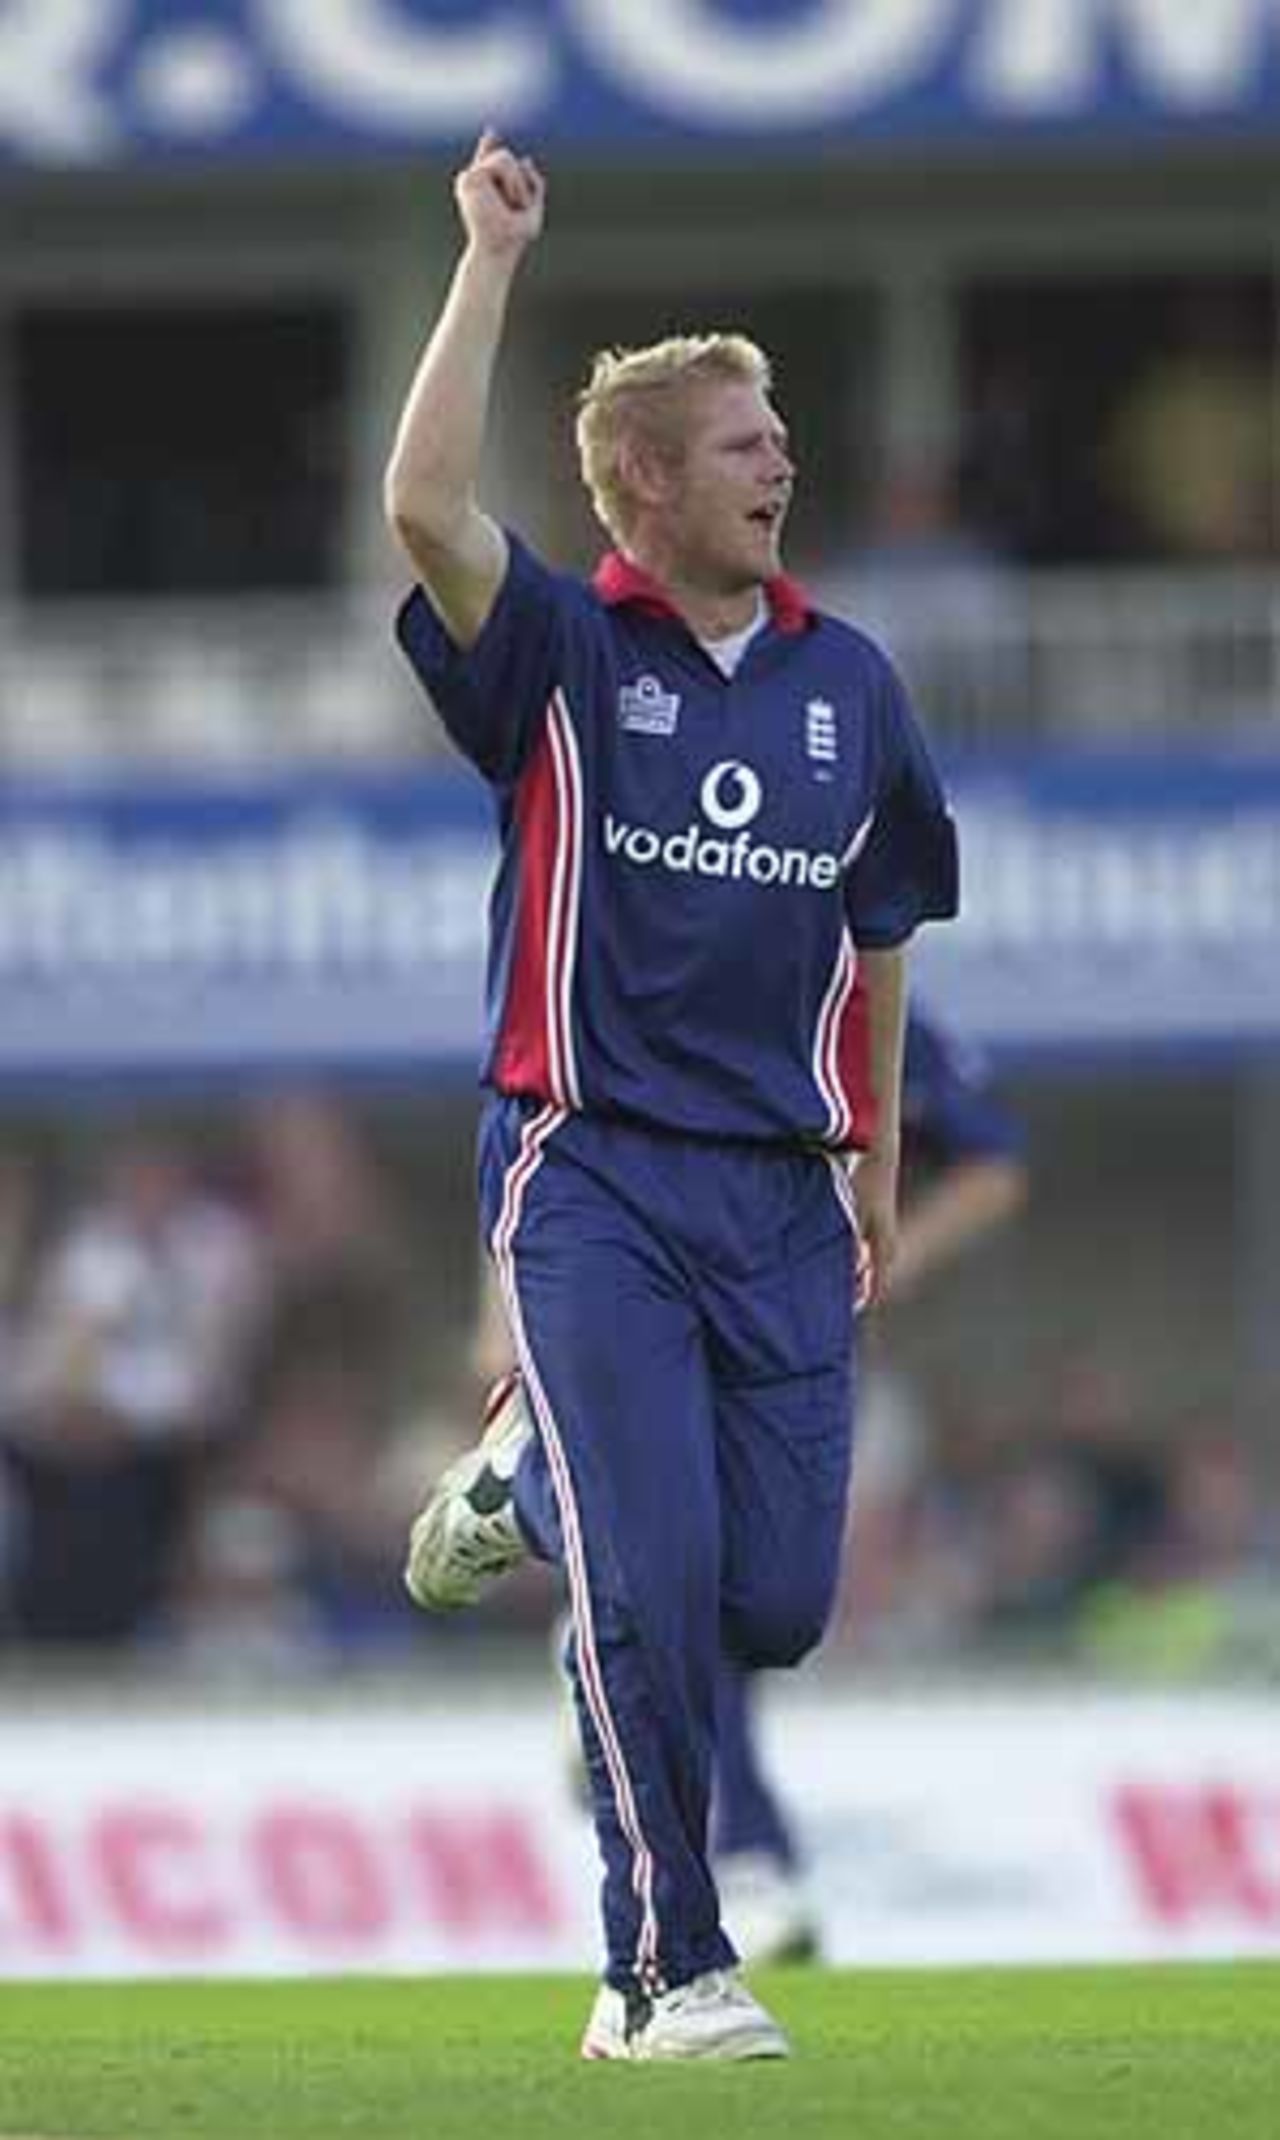 Hoggards dellight as he gets Tendulkar out, England v India, NatWest Series, The Oval, Tue 9 Jul 2002